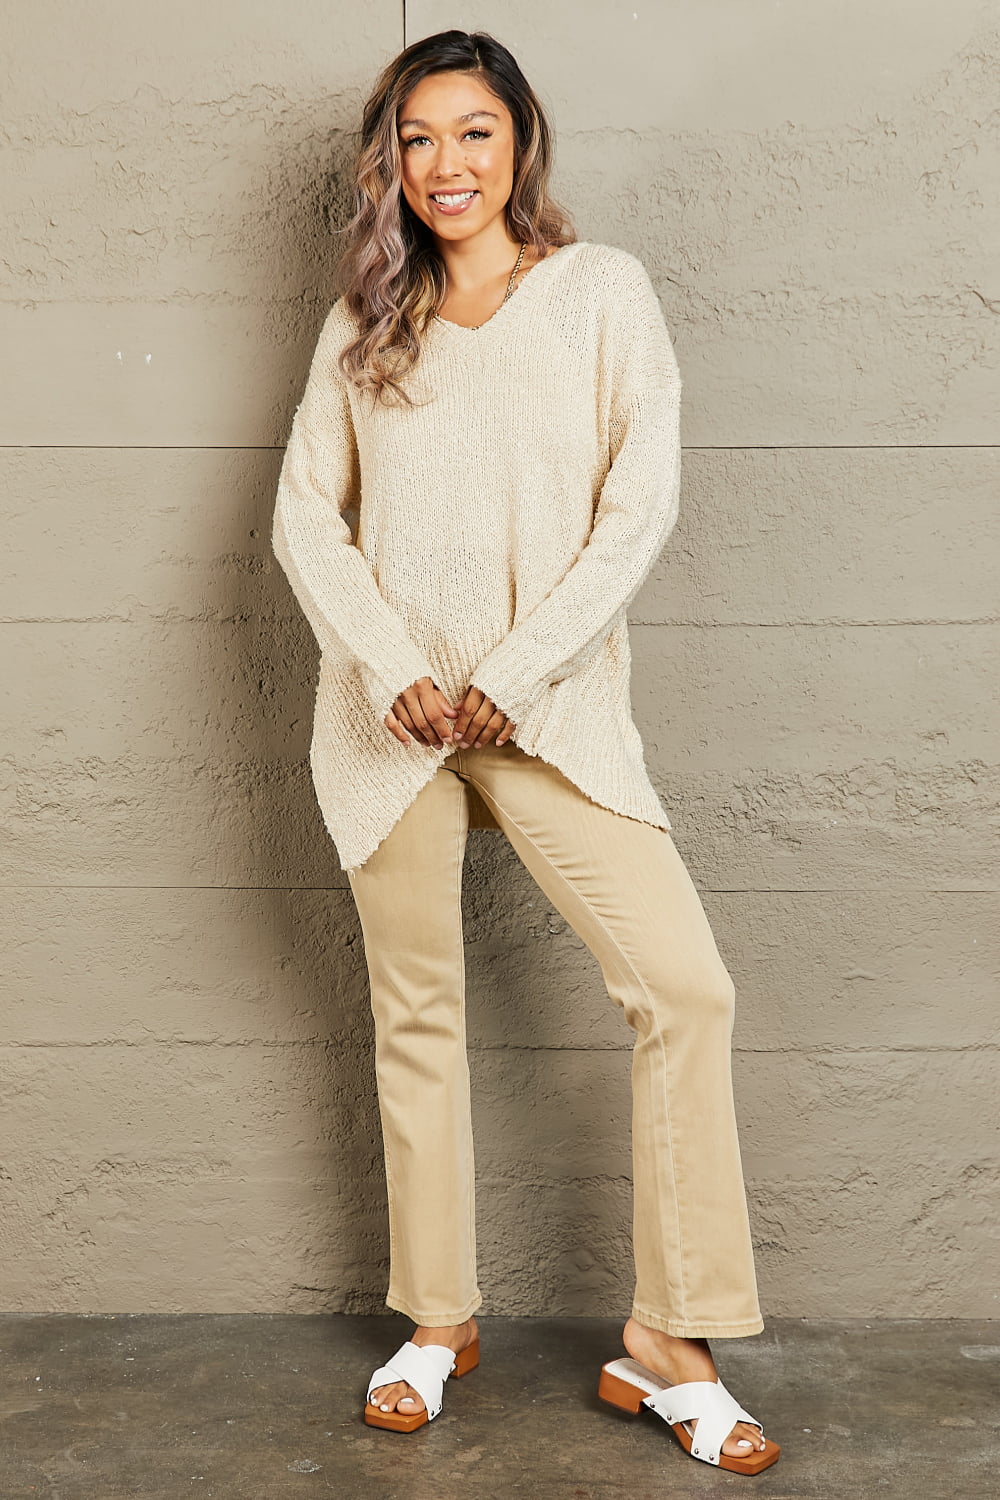 By The Fire Full Size Draped Detail Knit Sweater - Sweaters - Shirts & Tops - 10 - 2024